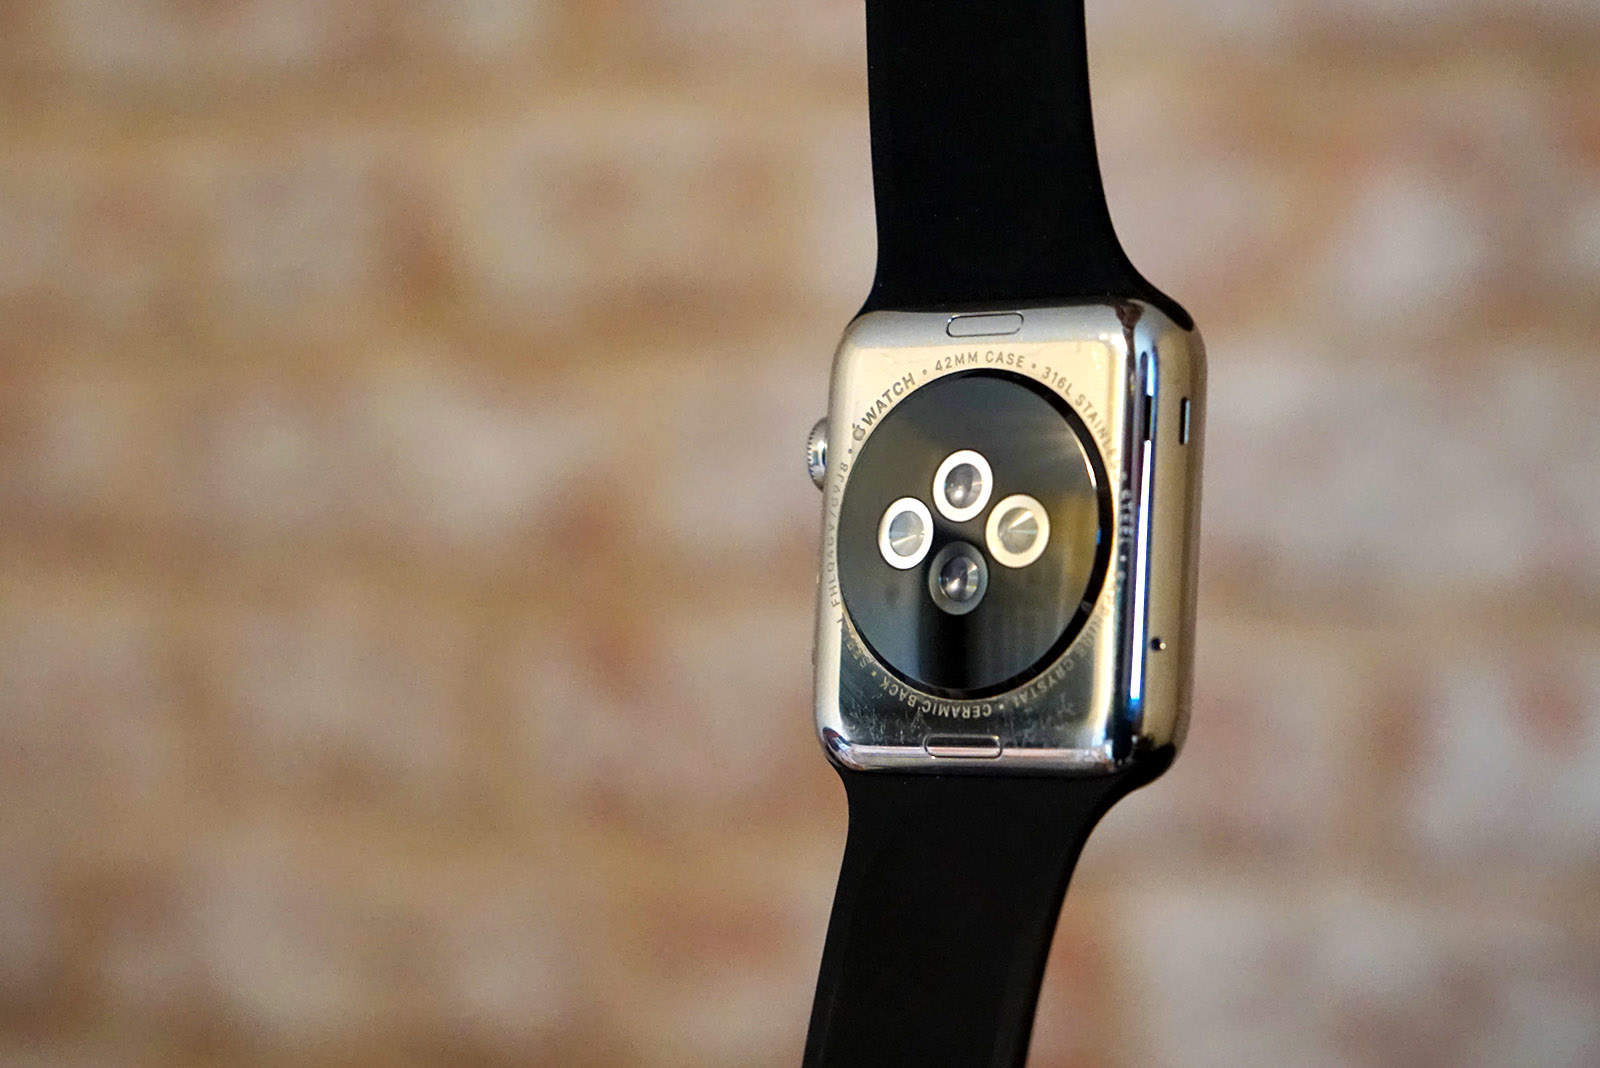 Update your fancy wrist computer to the latest watchOS.